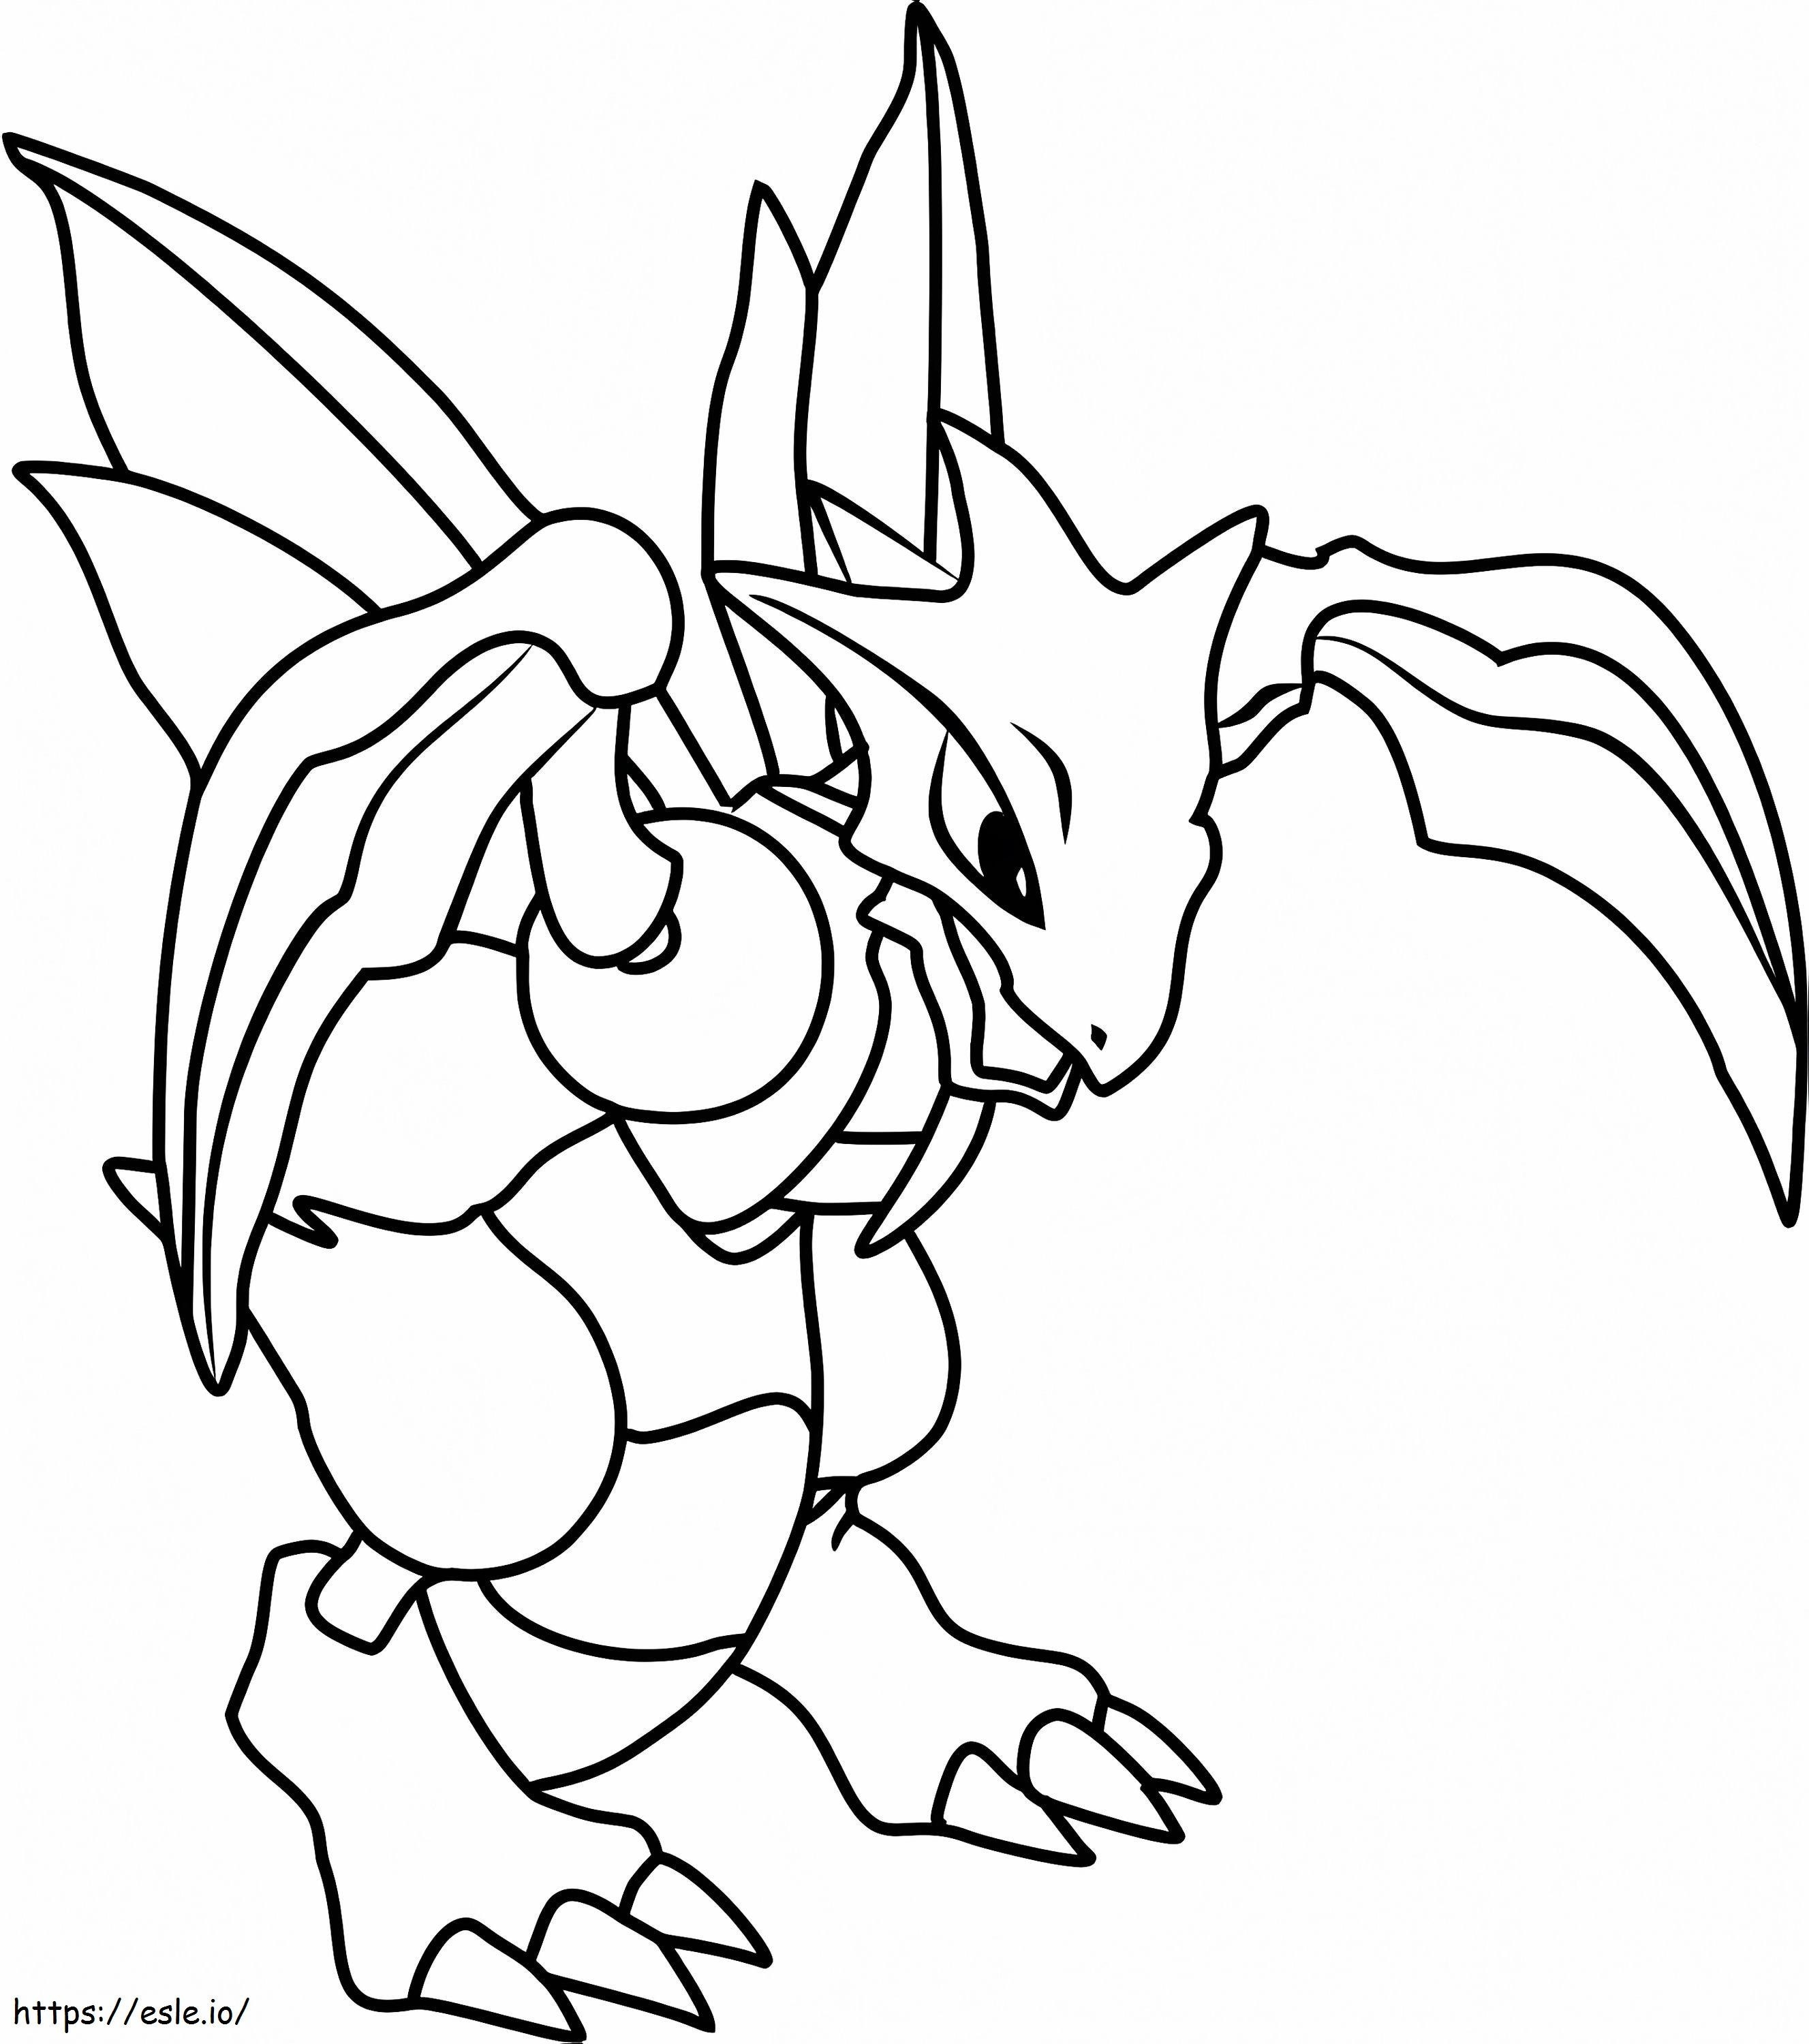 Printable Scyther Pokemon coloring page